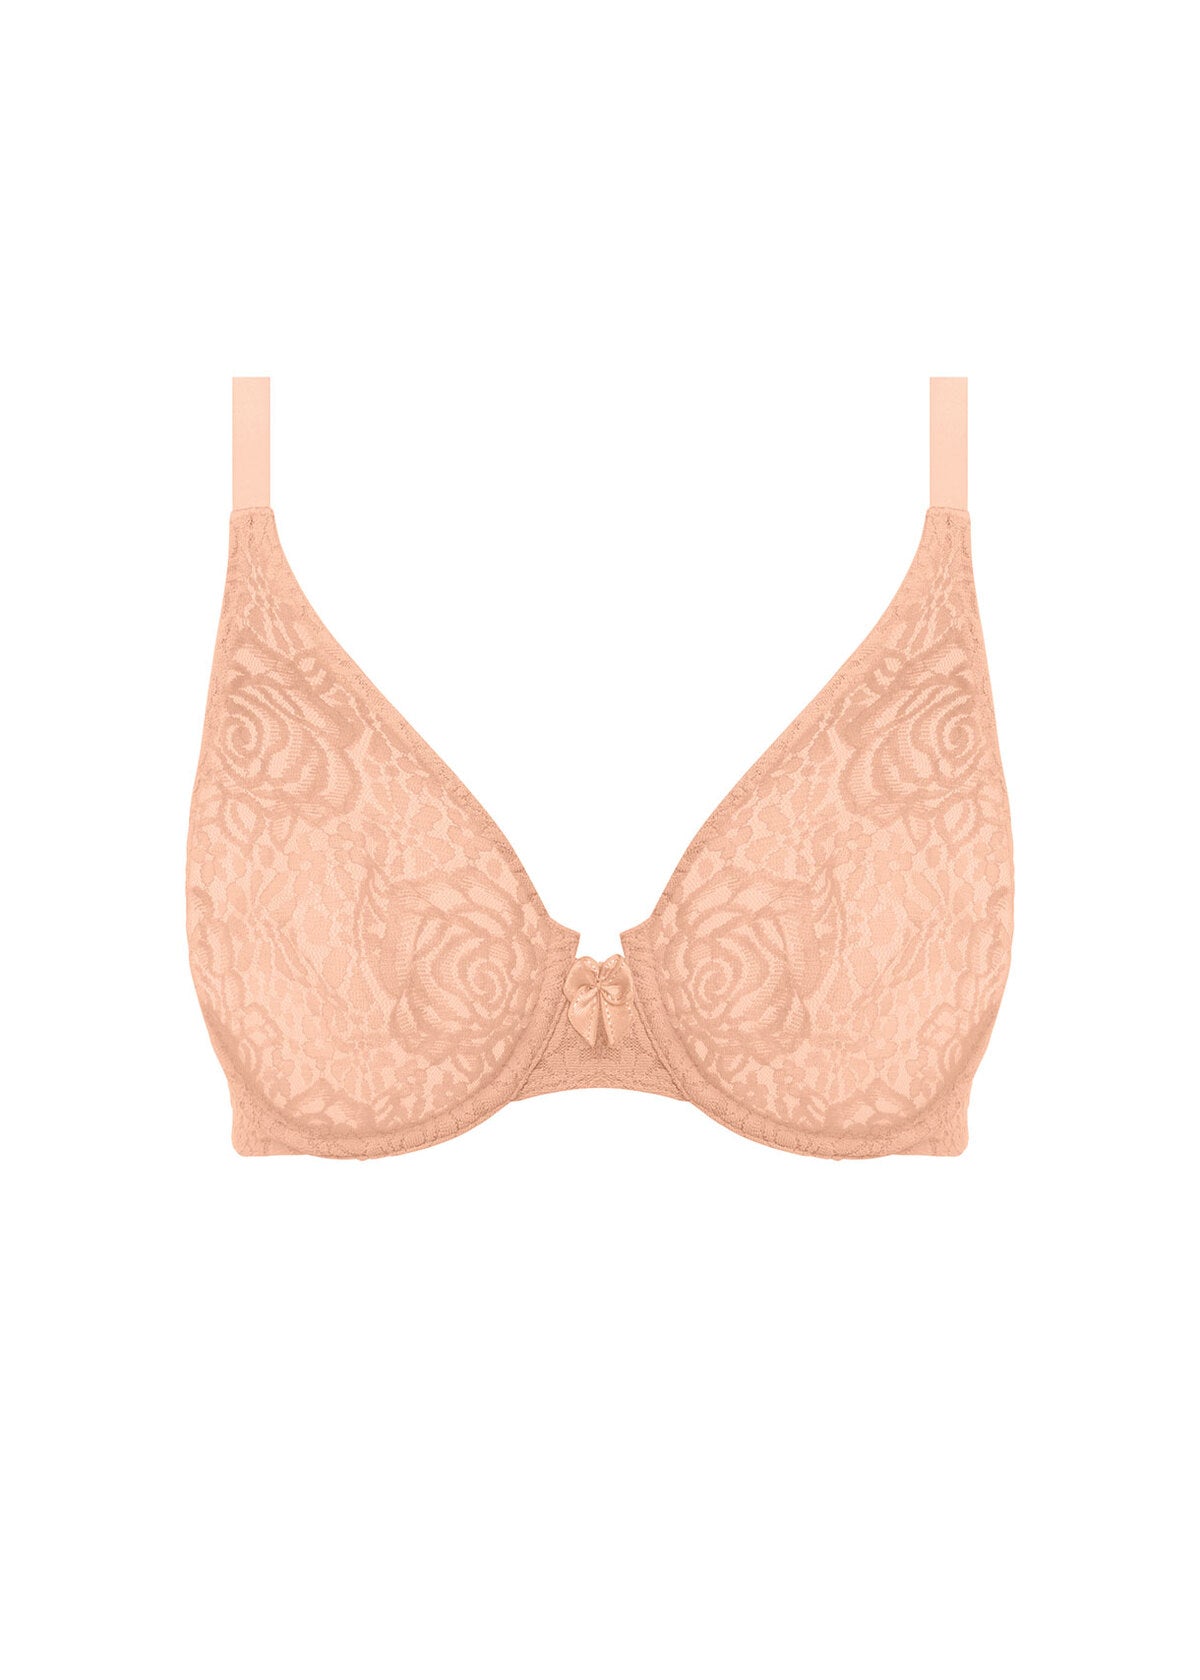 Wacoal Halo Lace Nude Moulded Underwire Bra